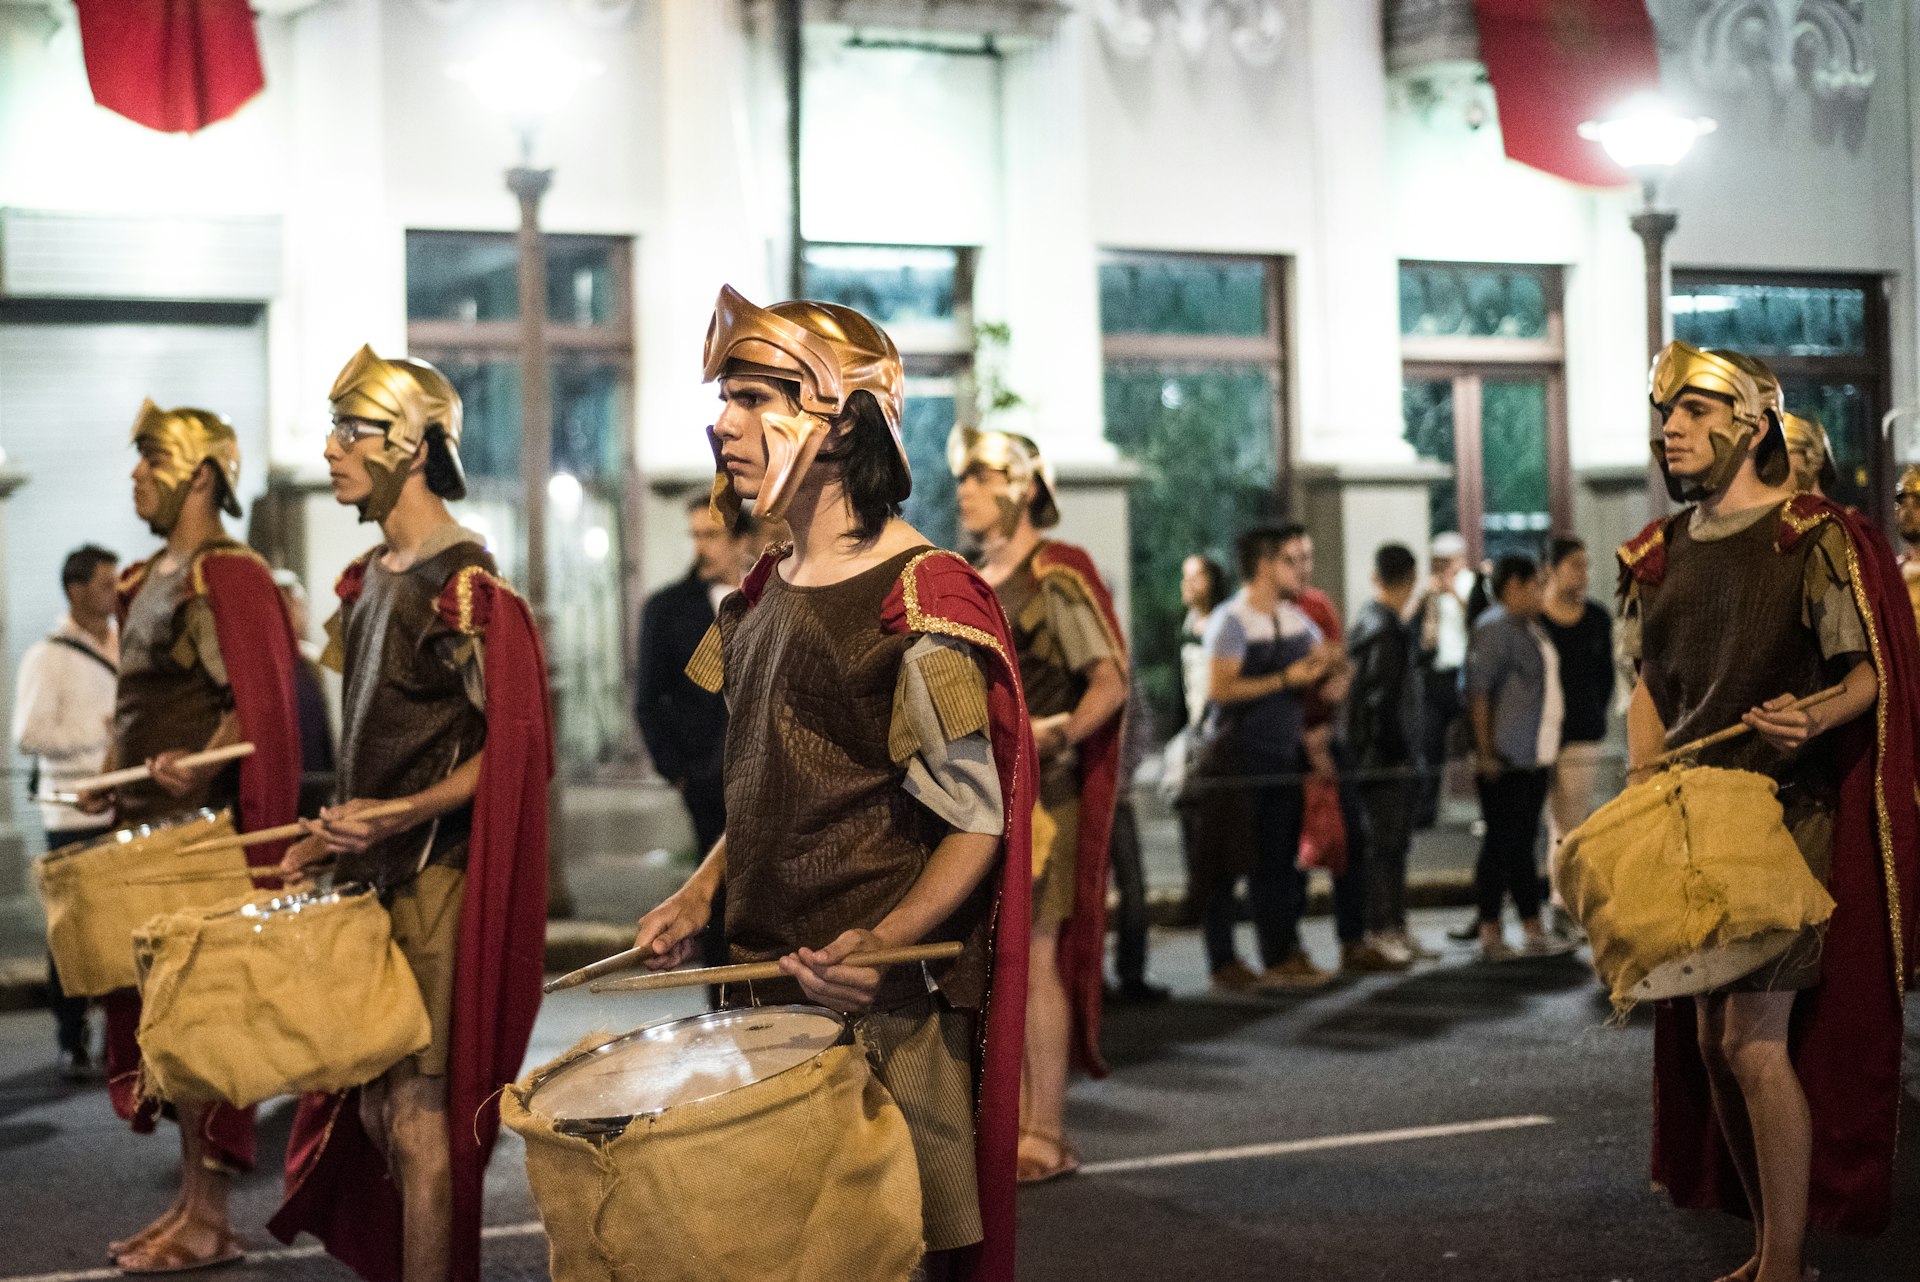 A troop of actors dressed as Roman soldiers march through the city streets in an Easter week procession